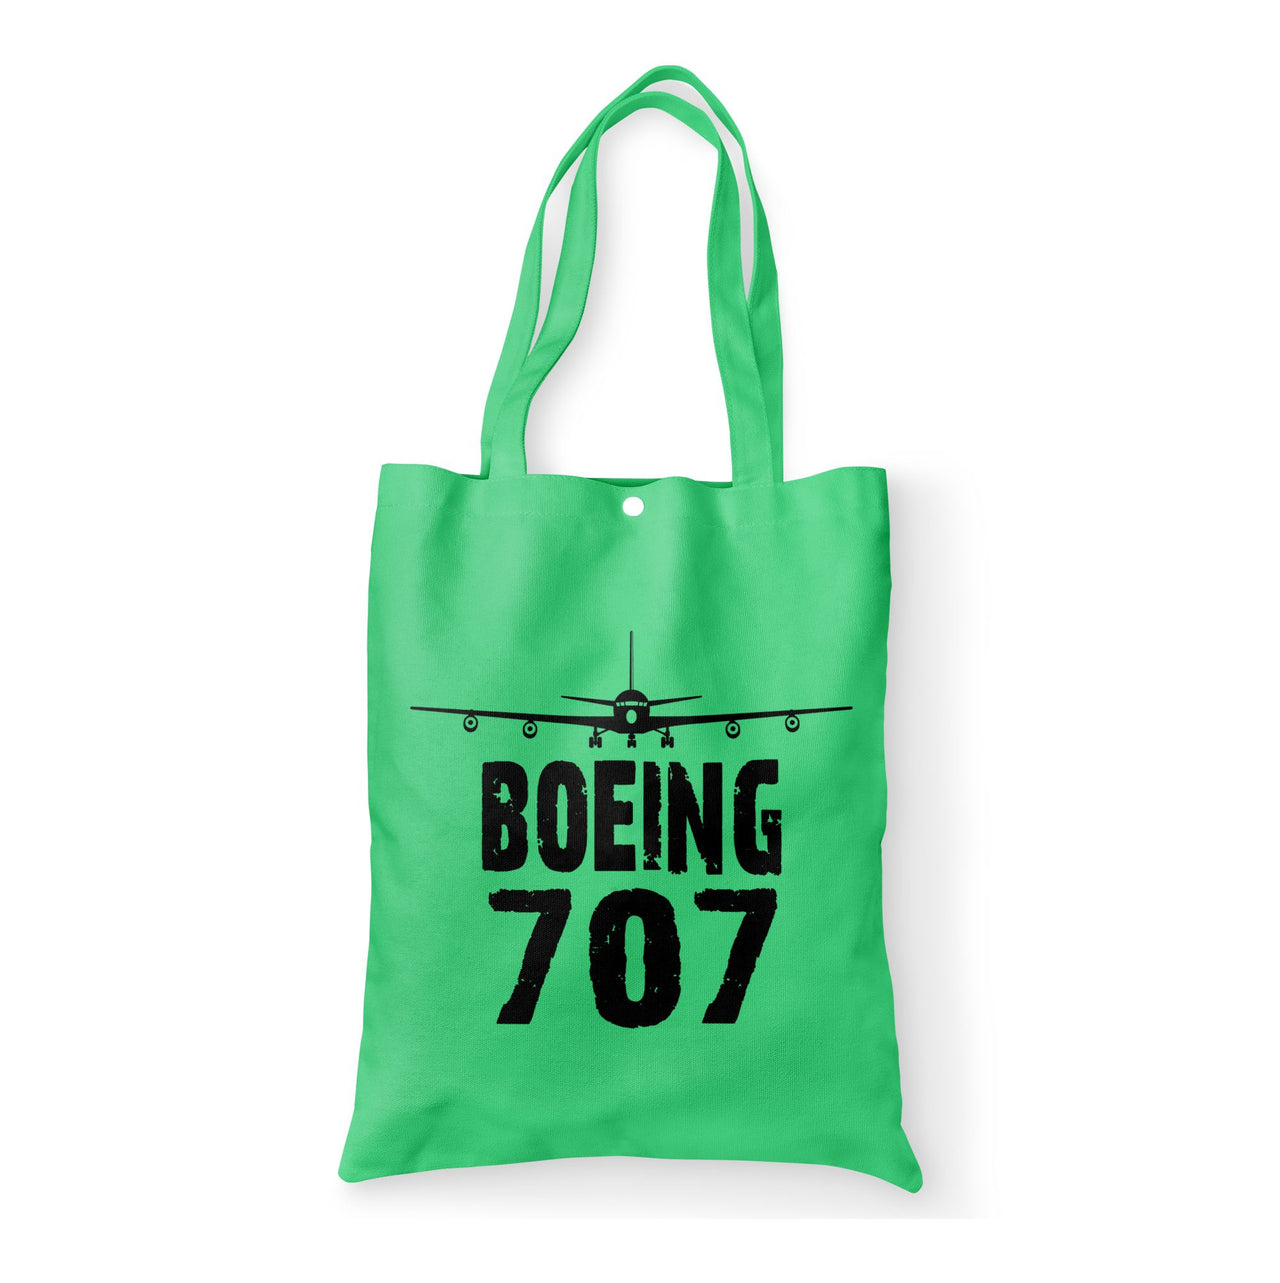 Boeing 707 & Plane Designed Tote Bags